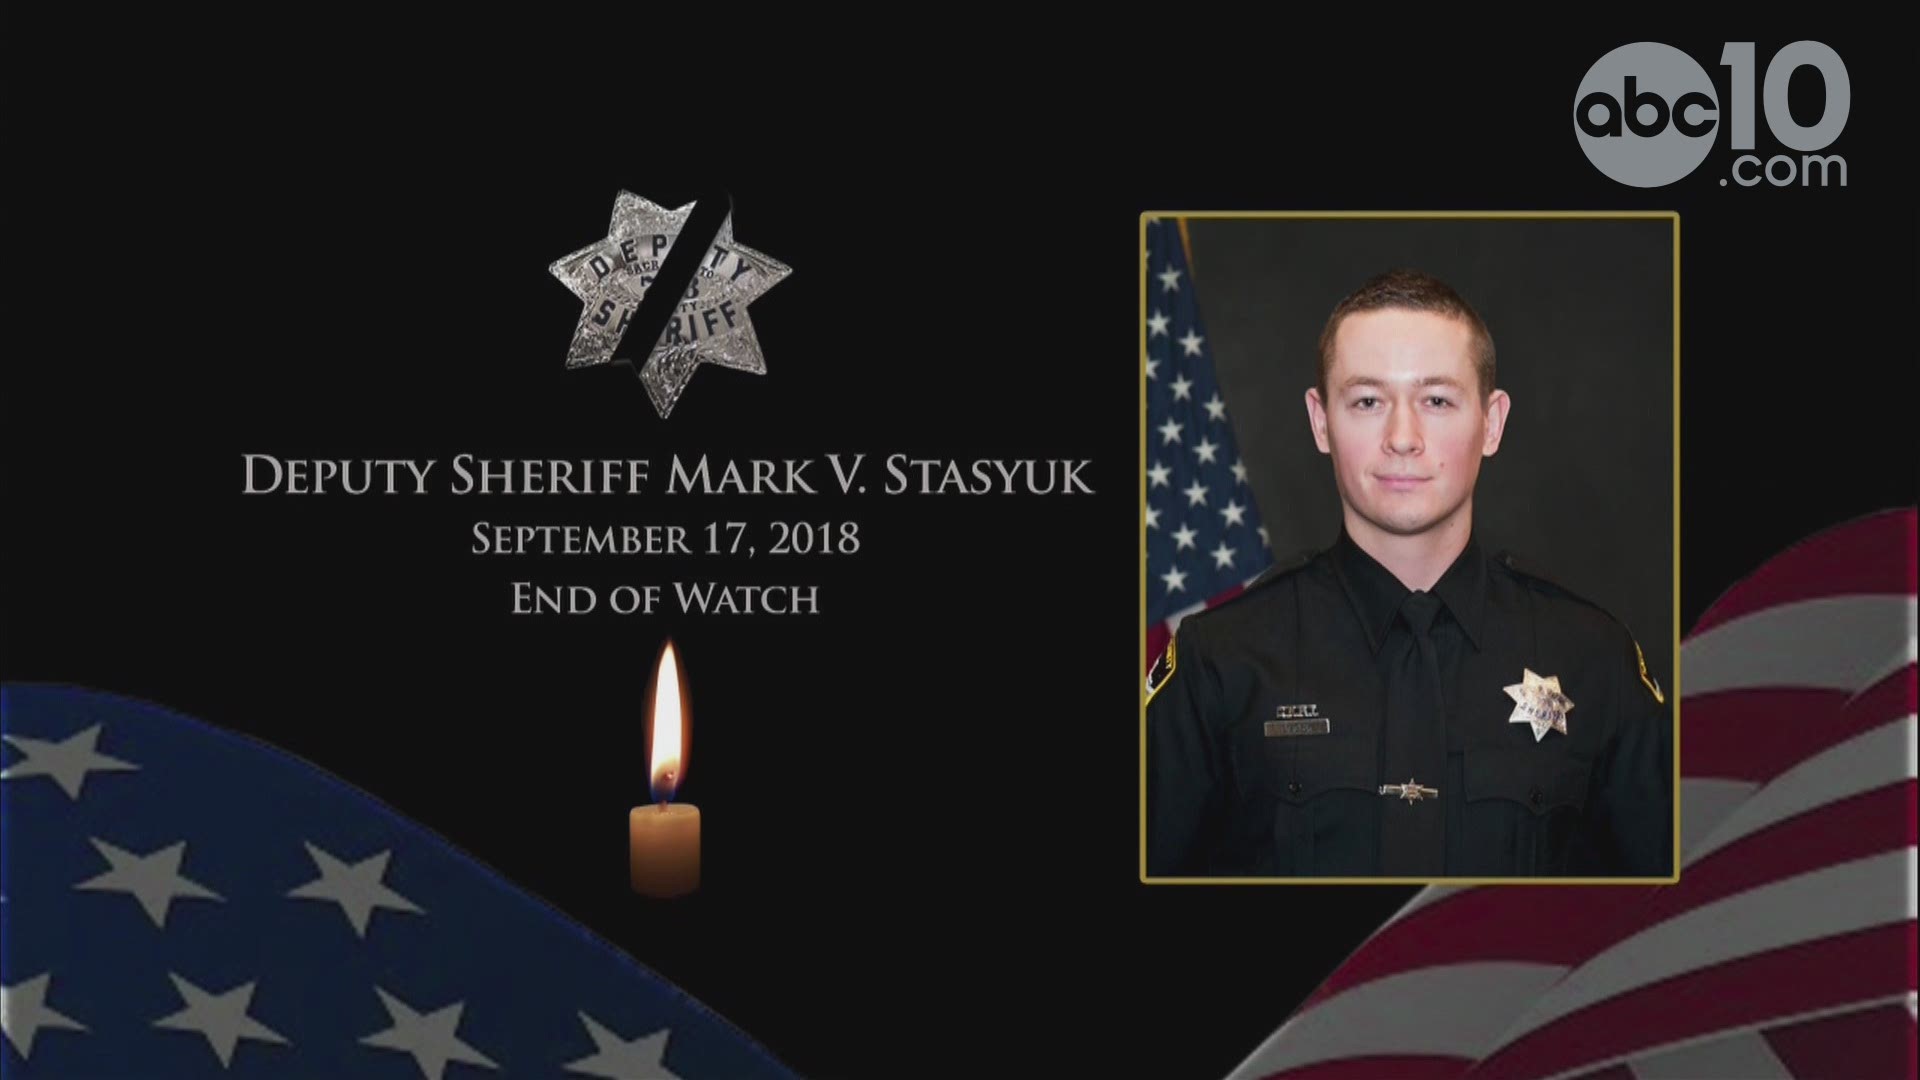 Listen:  Sgt. Mark Stasyuk's  "End of Watch" radio call from his memorial service.